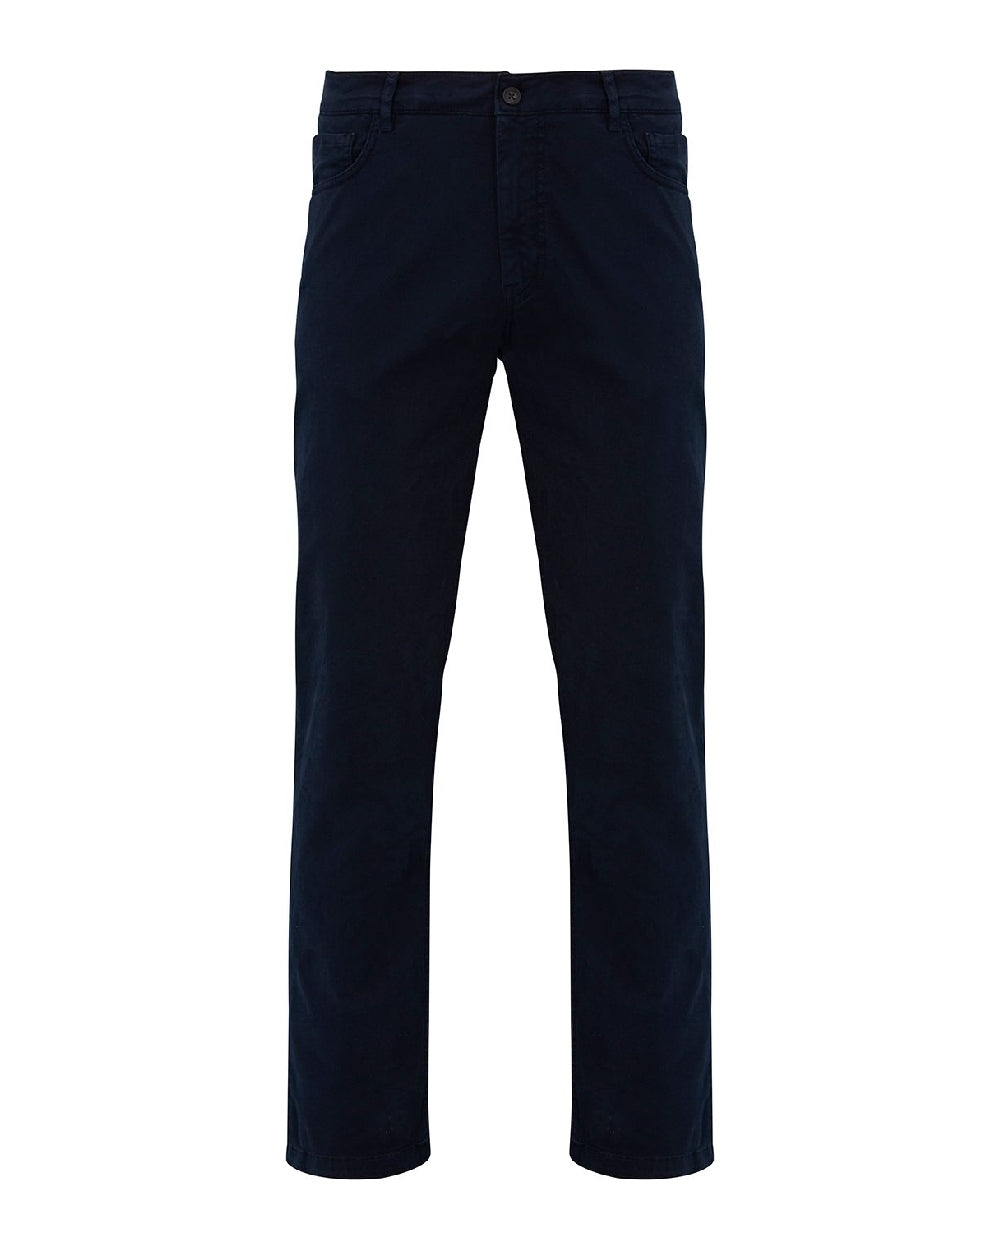 Alan Paine Mens Cheltham Chino Jeans in Navy 